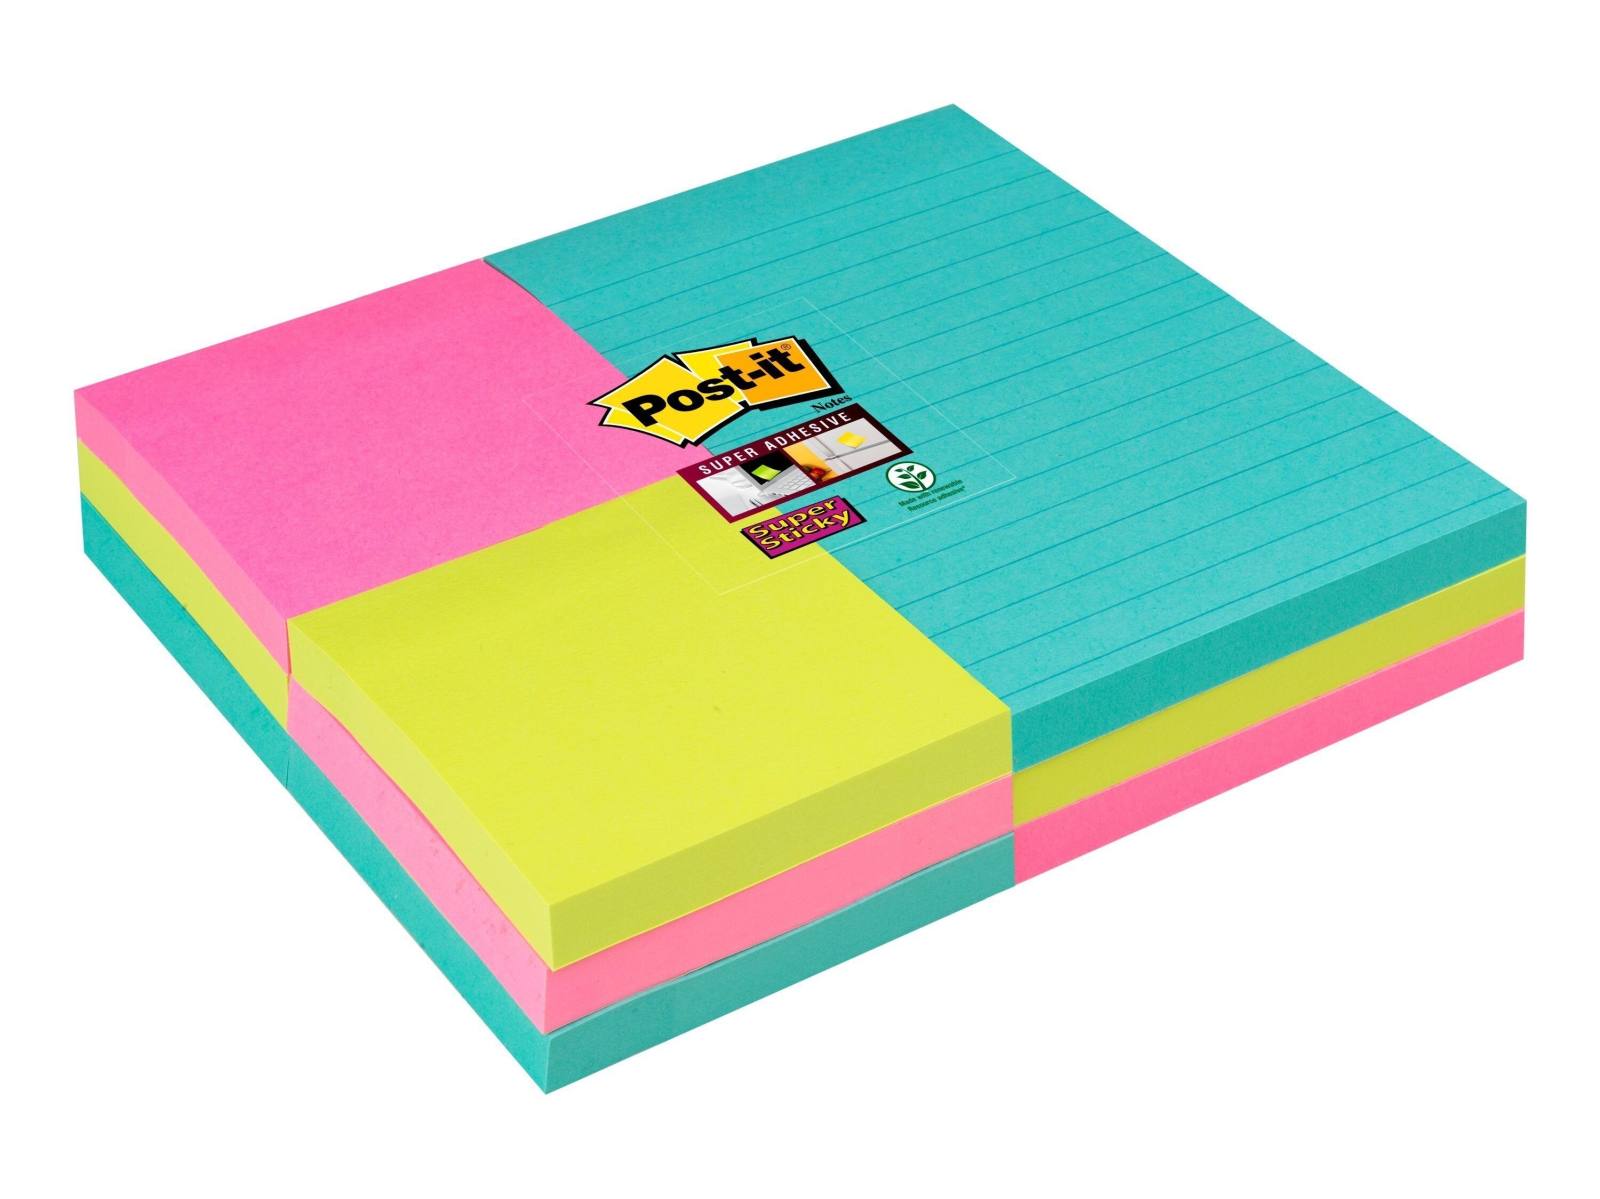 3M Post-it Super Sticky Notes 4633-SS9MIA-EU 9 pads of 90 sheets each, turquoise, neon green, neon pink, 6 pads 76 mm x 76 mm, plain &amp; 3 pads 101 mm x 152 mm, lined, PEFC certified